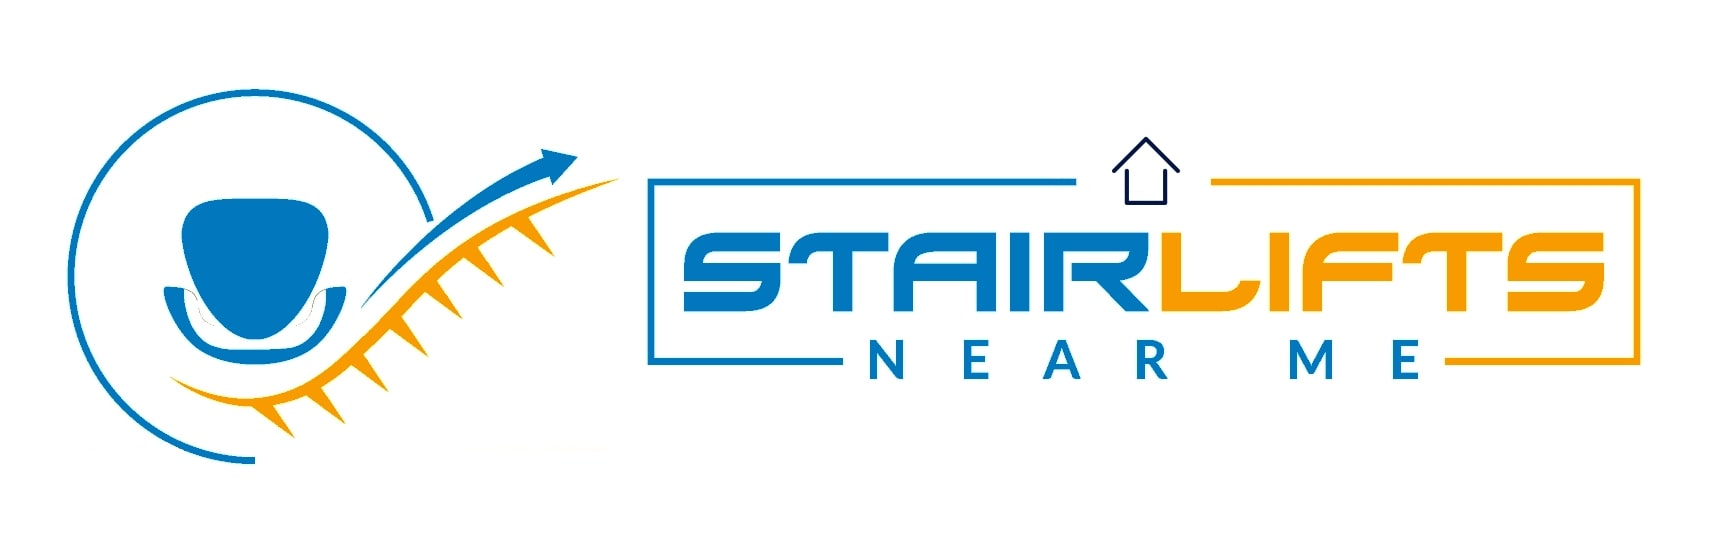 Stairlifts Near Me Logo